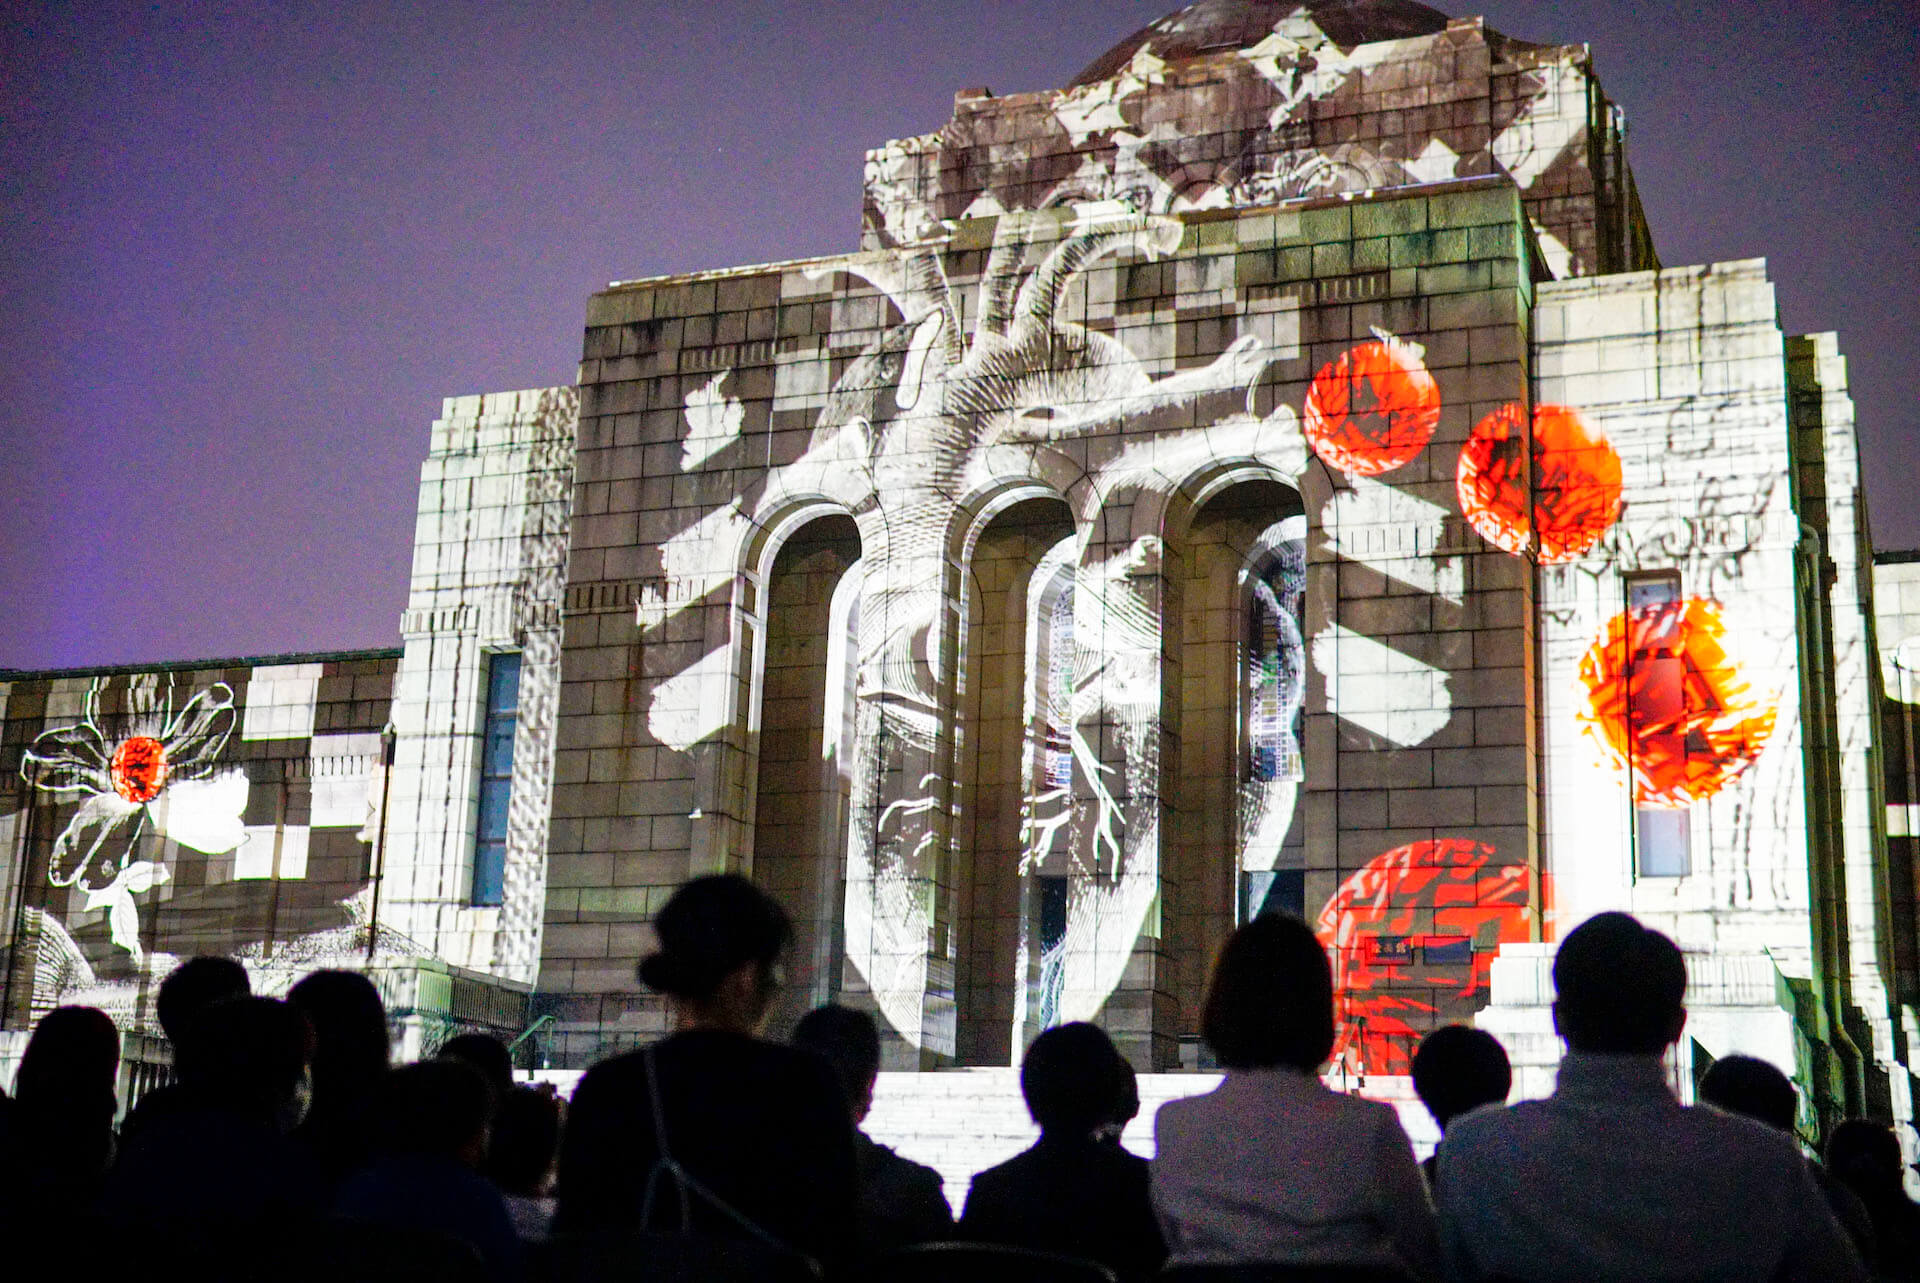 【REPORT】TOKYO LIGHTS 2022｜重要文化財が一夜限りの七変化！？『1minute Projection Mapping Competition』 art-culture221201-tokyolights-6